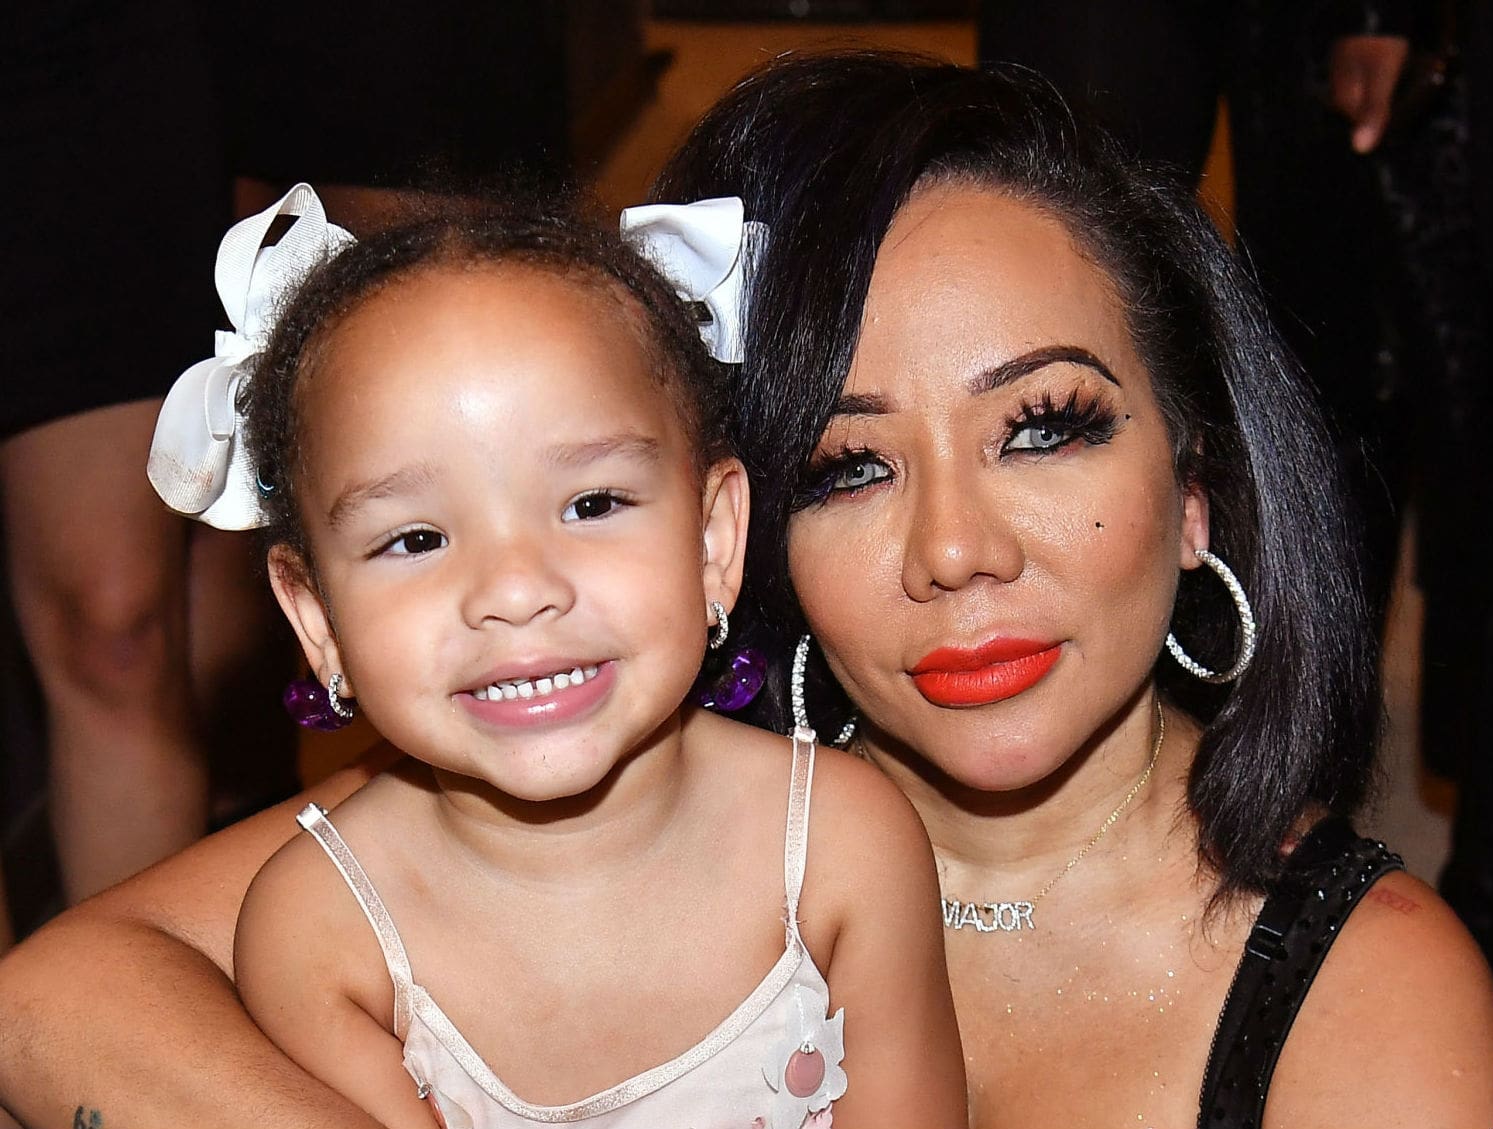 T.I. And Tiny Harris' Daughter, Heiress Harris Is Sealing Deals On A New Property For Her Parents - See Her Cute Pose